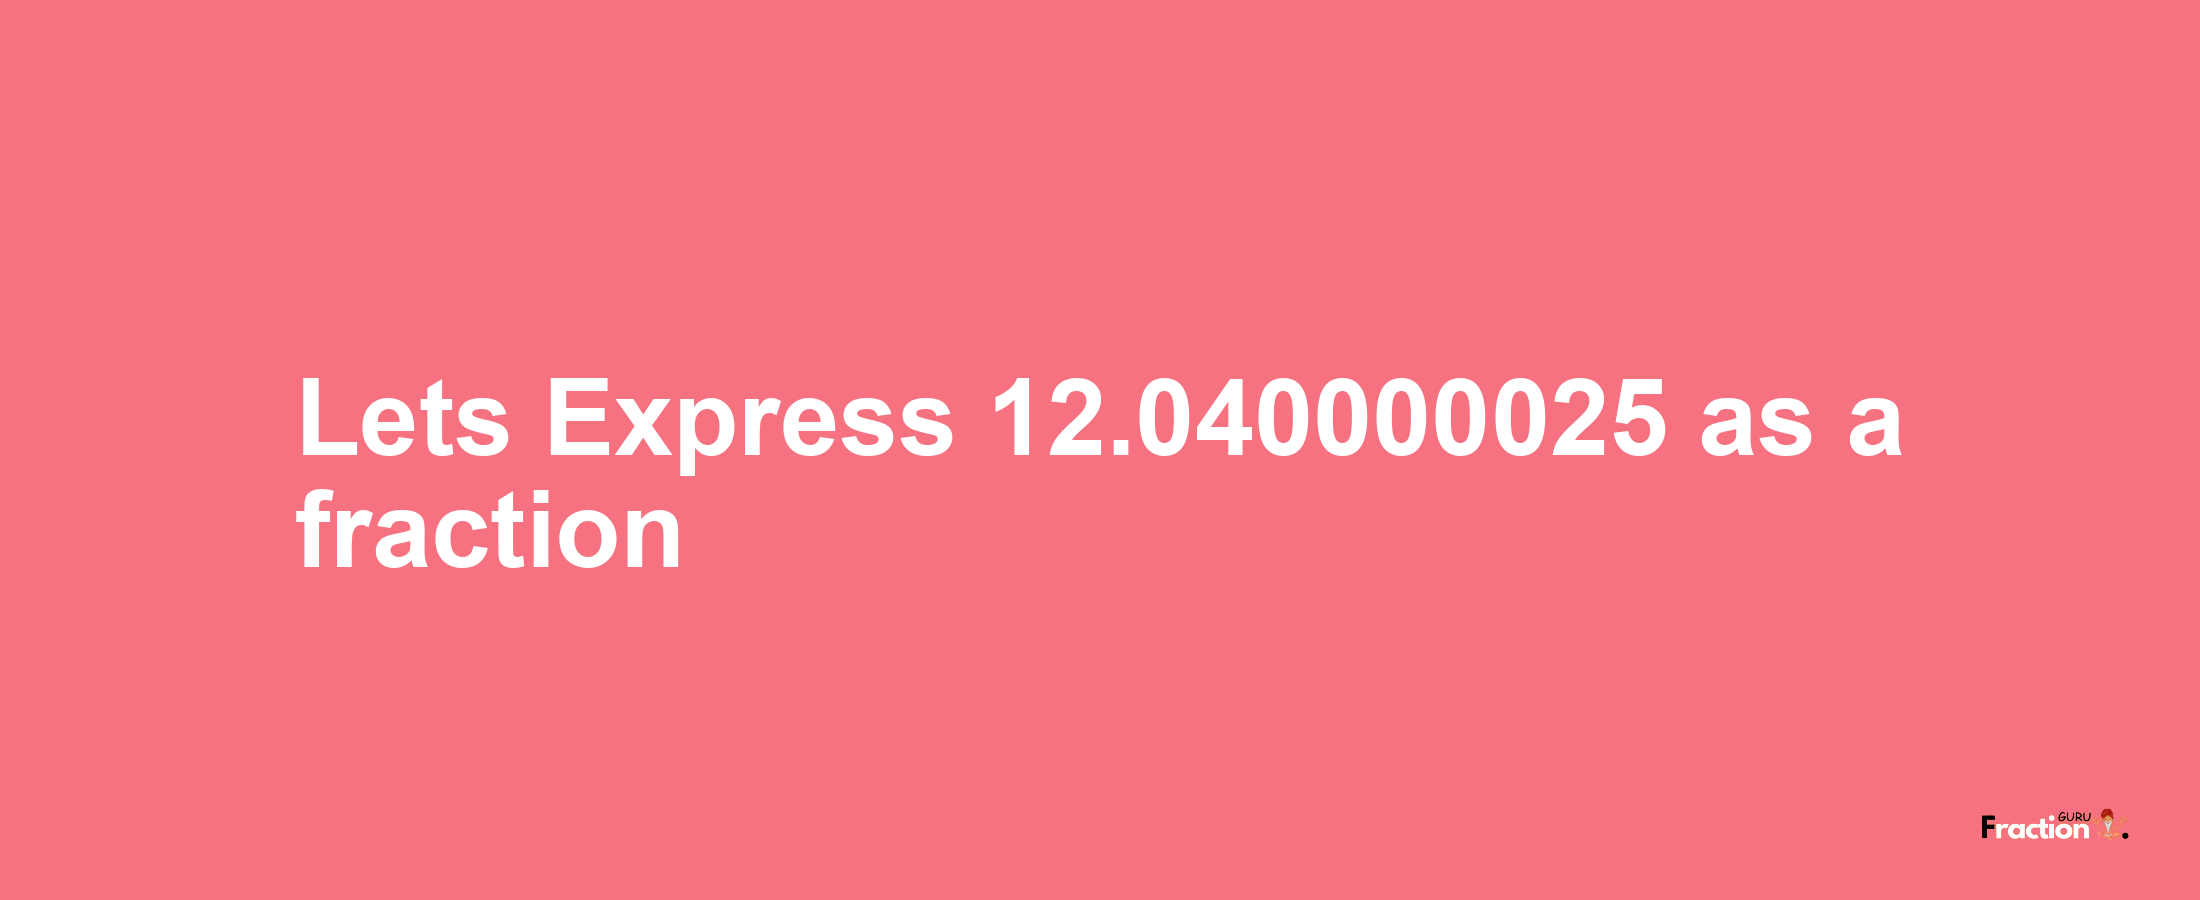 Lets Express 12.040000025 as afraction